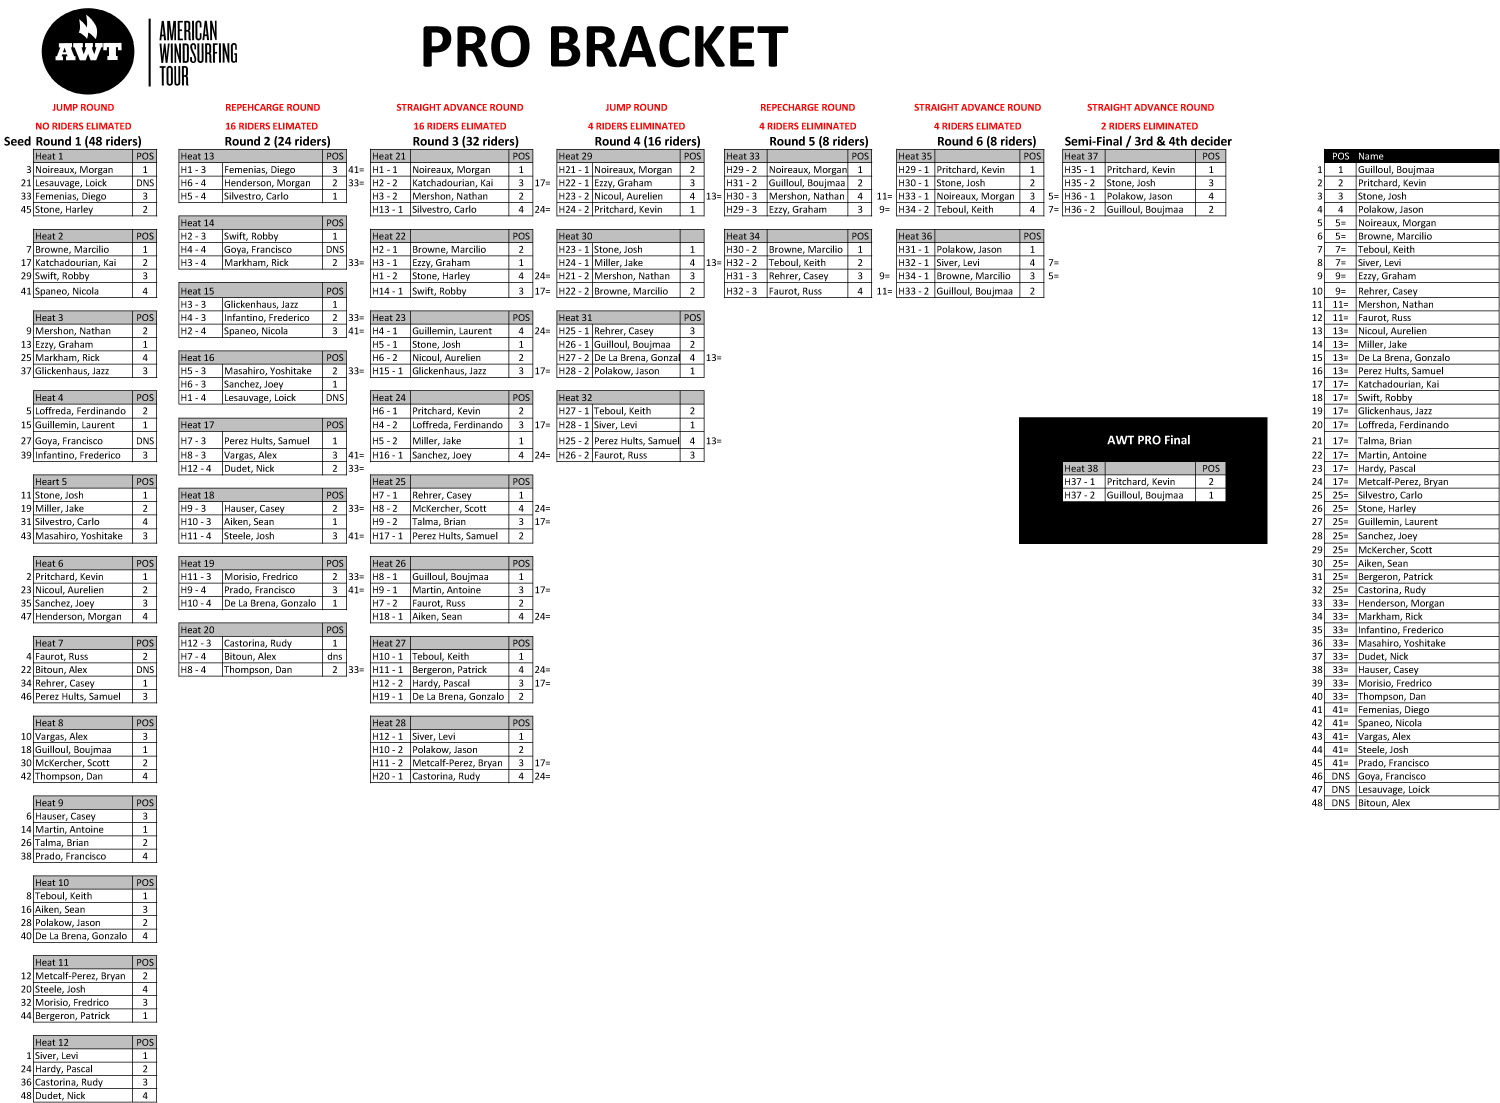 AWT-Pro-FINAL-and-RESULTS